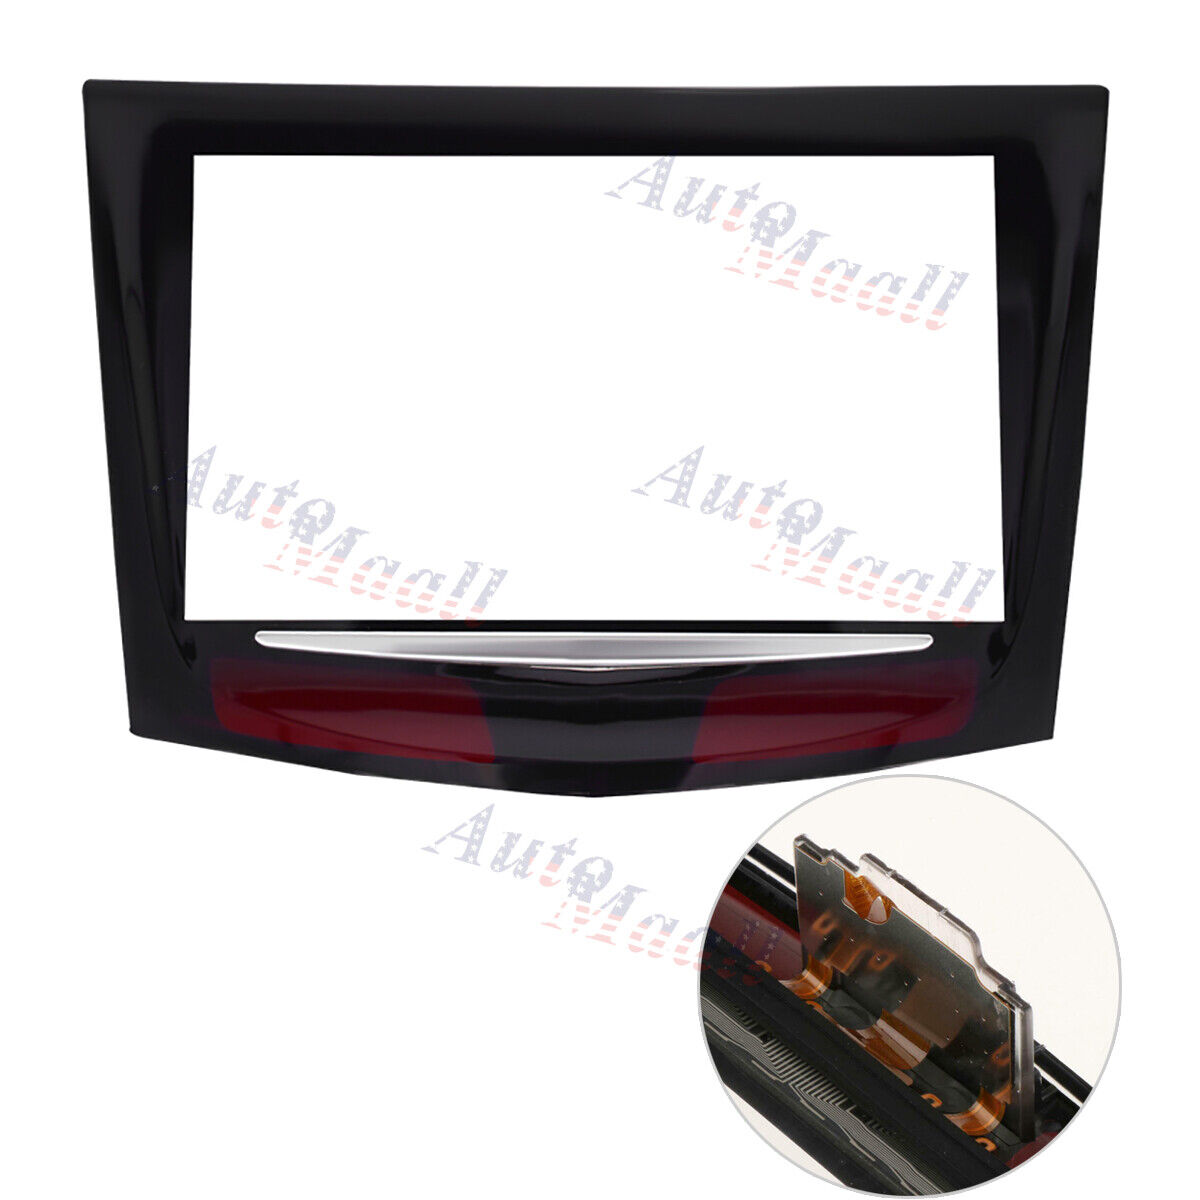 Touch Screen Display For Cadillac Escalade ATS CTS SRX XTS CUE 2018+ TouchSense